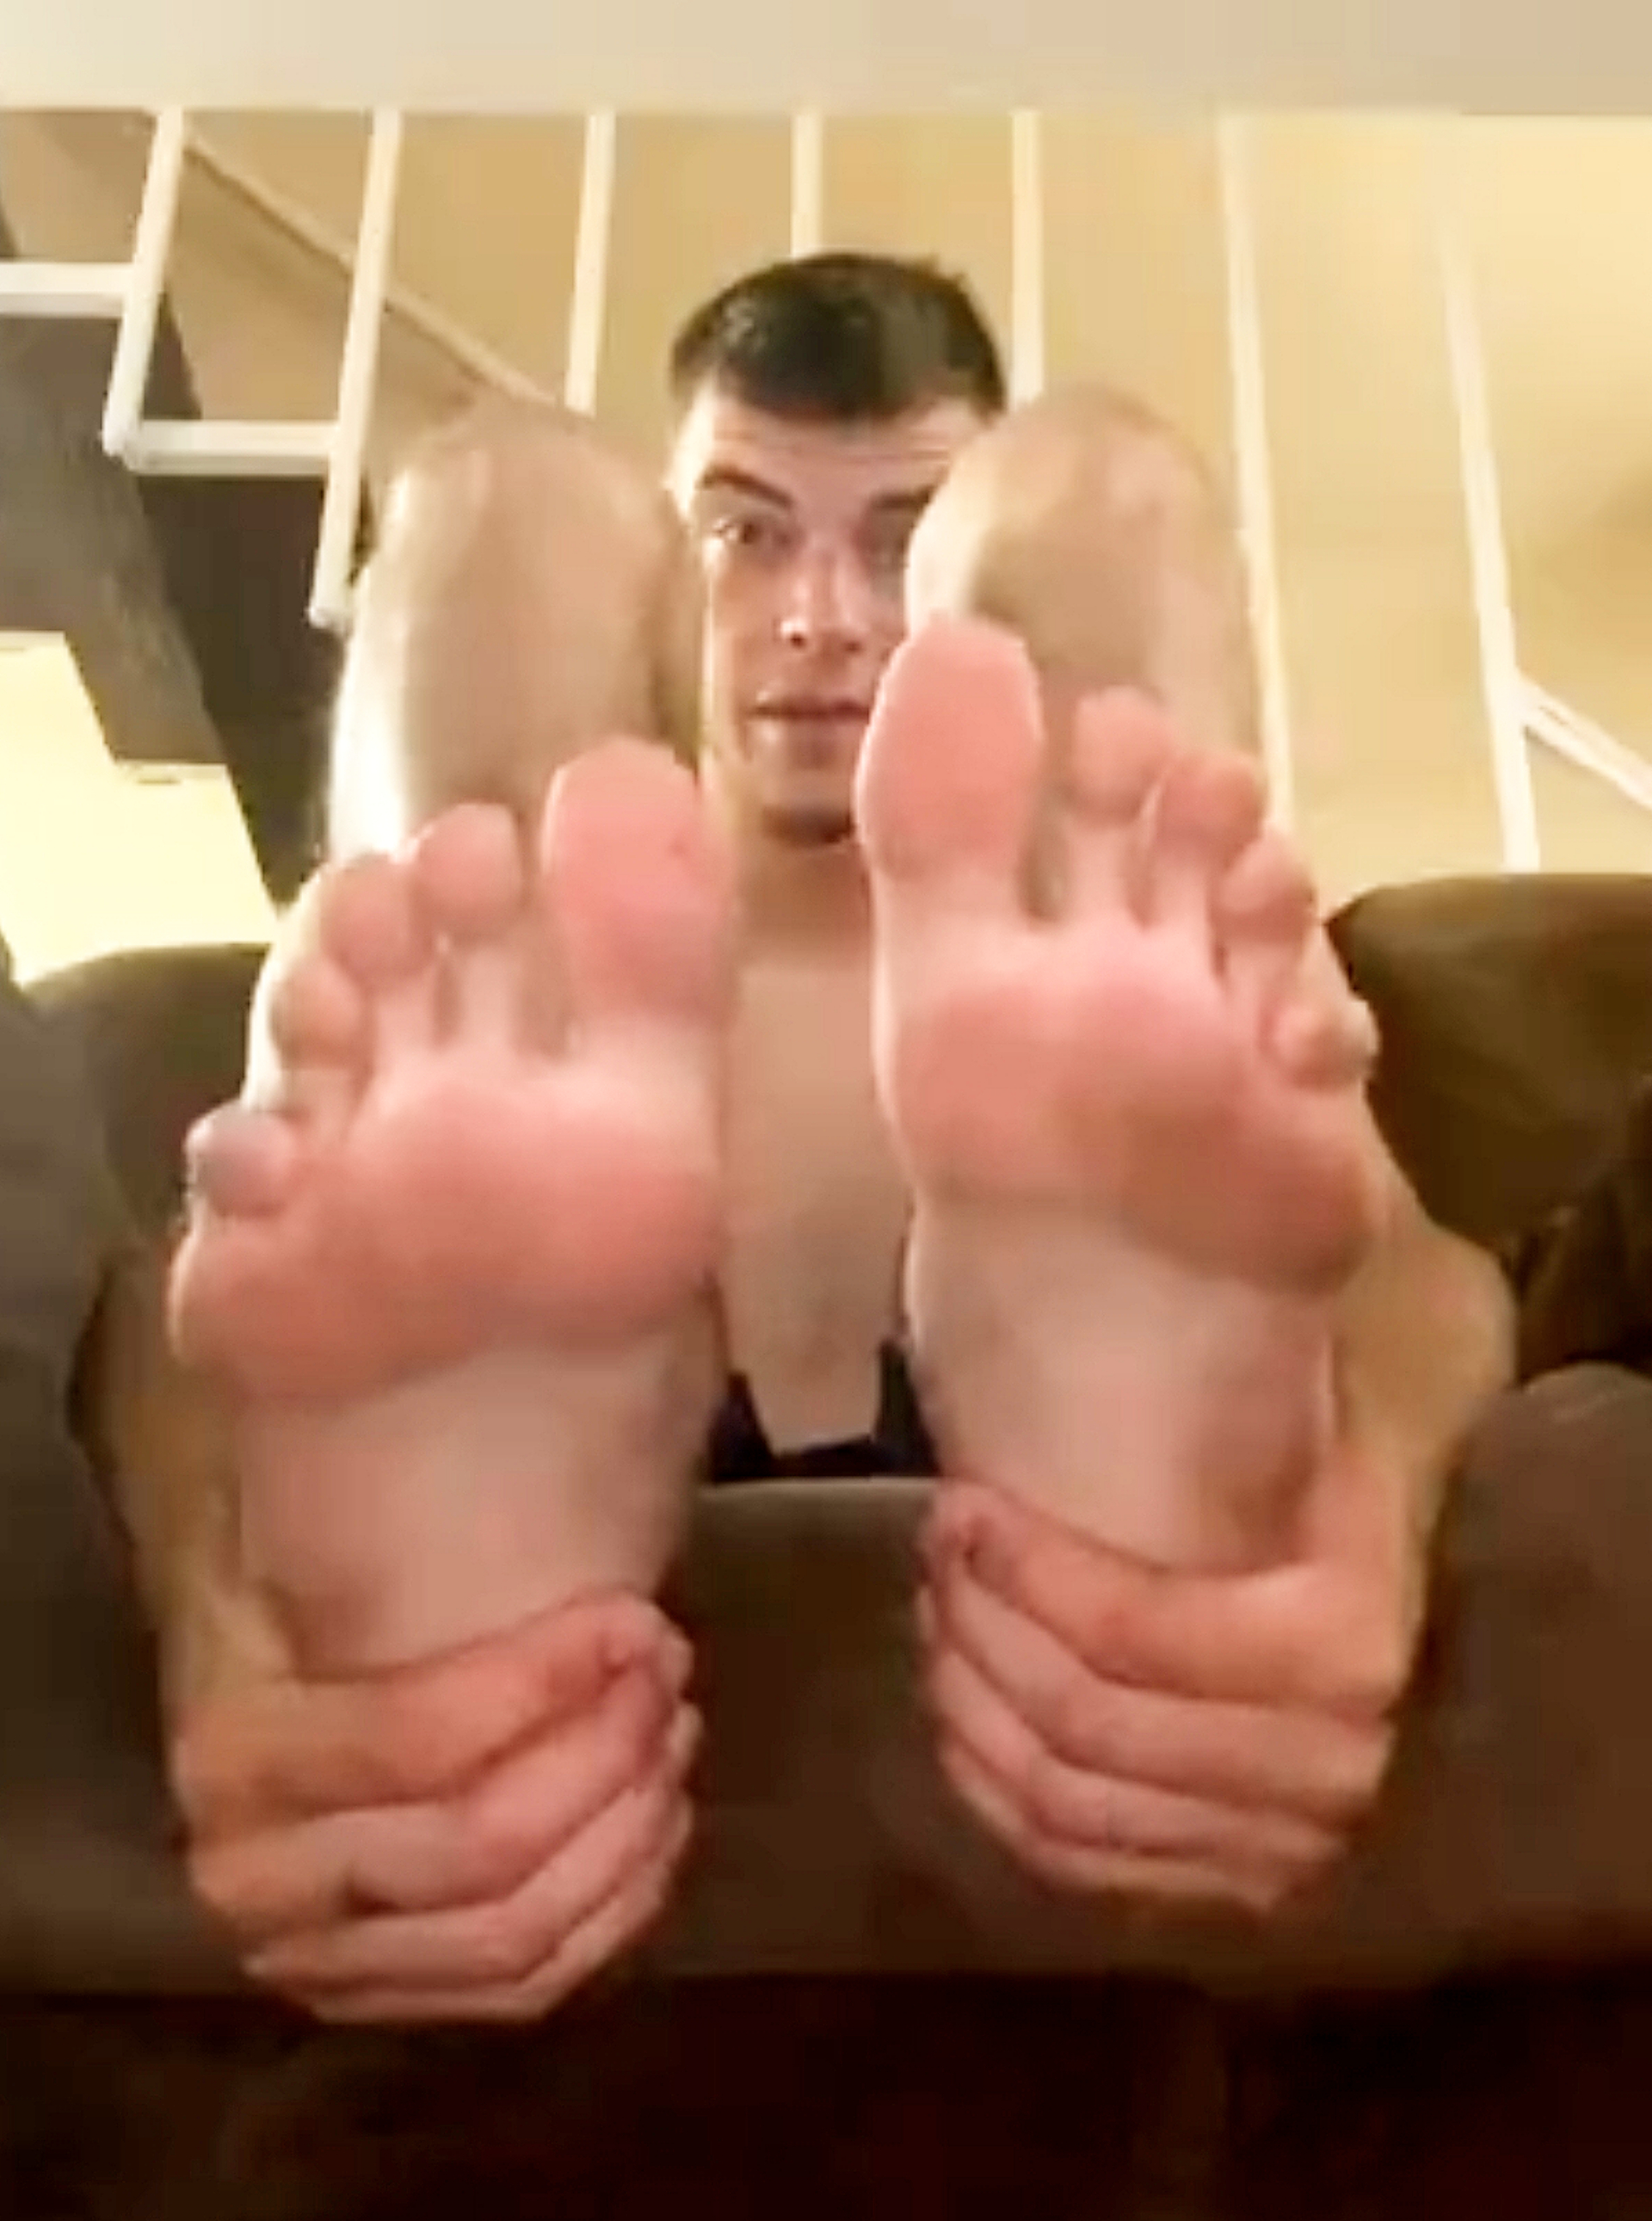 SIZE 18 FEET long soles and toes!